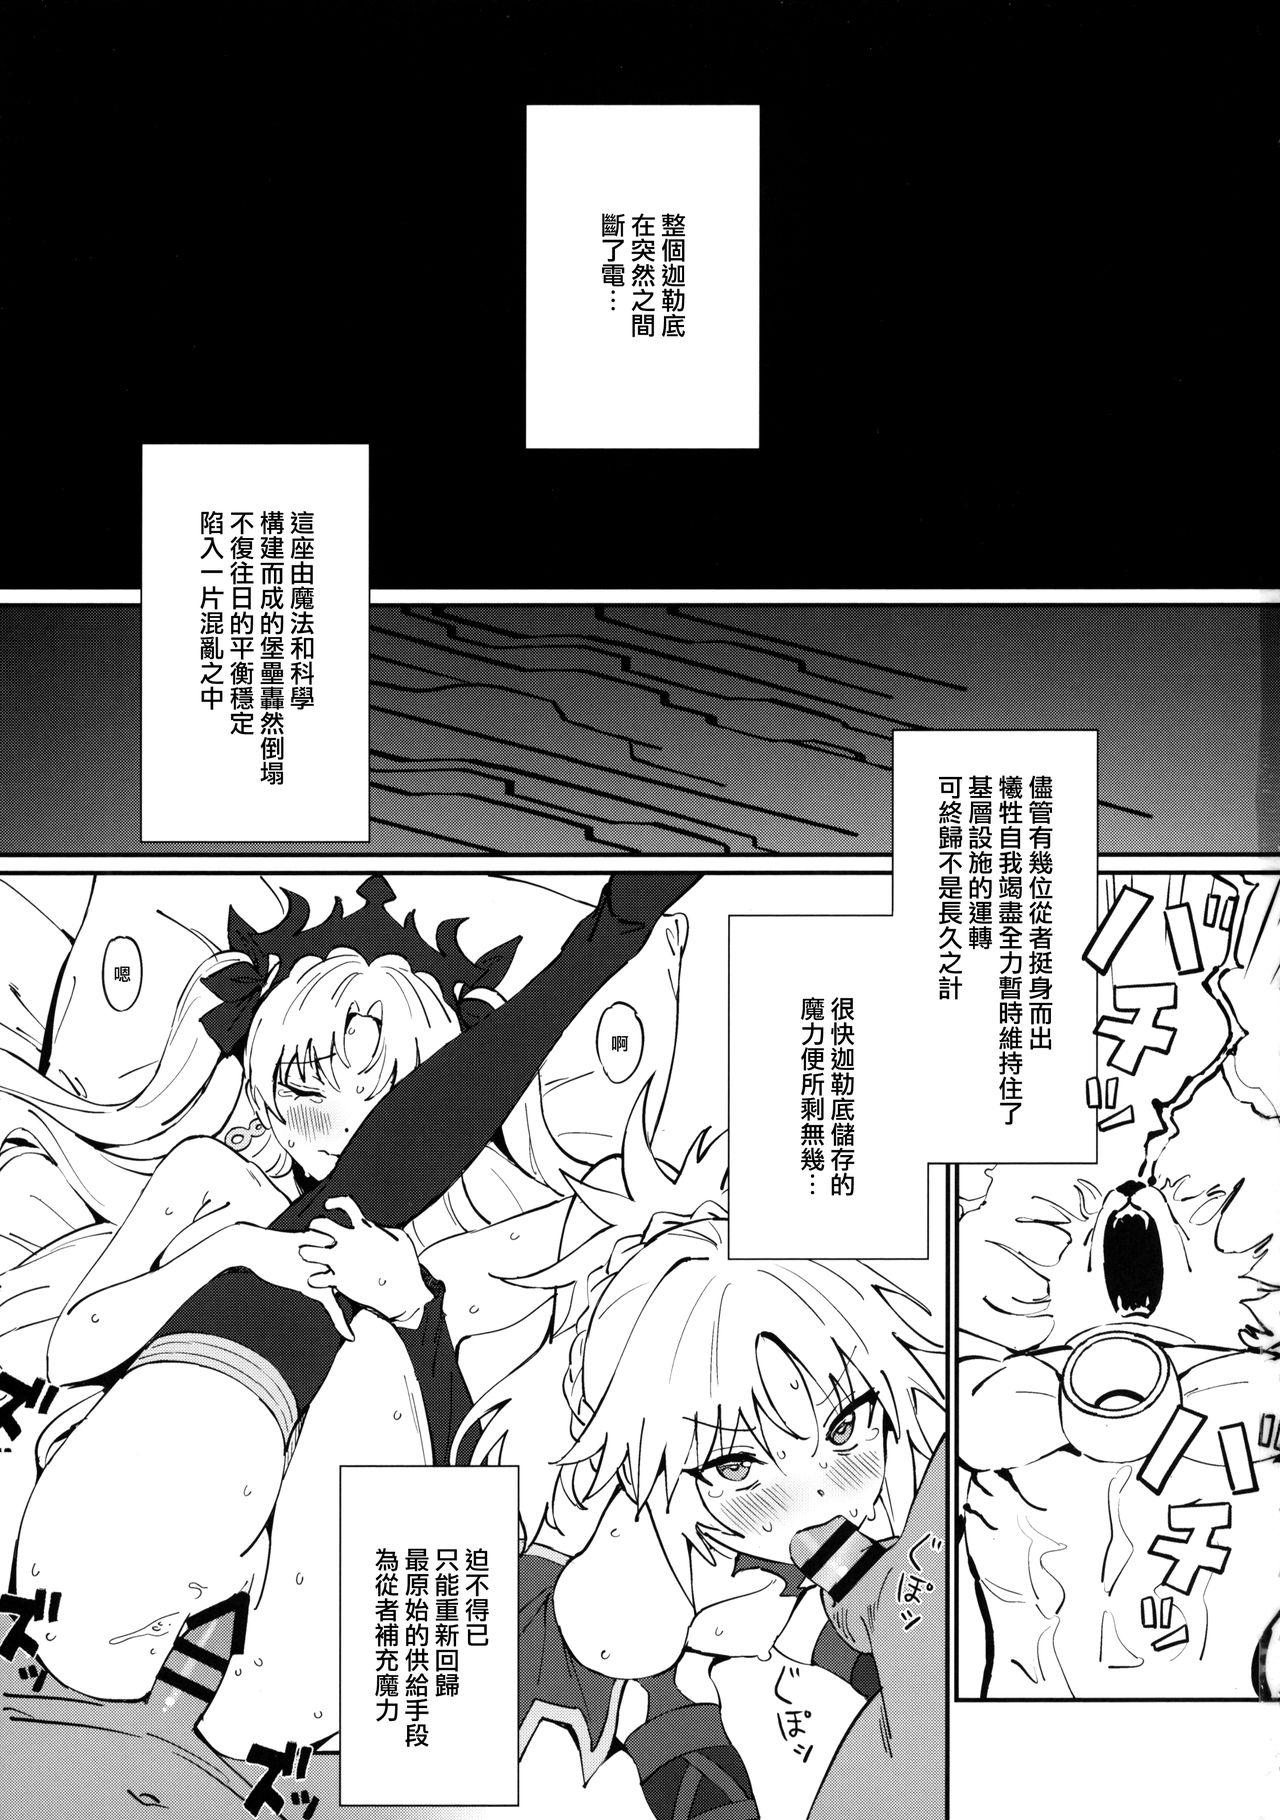 Art Anten - Fate grand order Squirters - Page 3